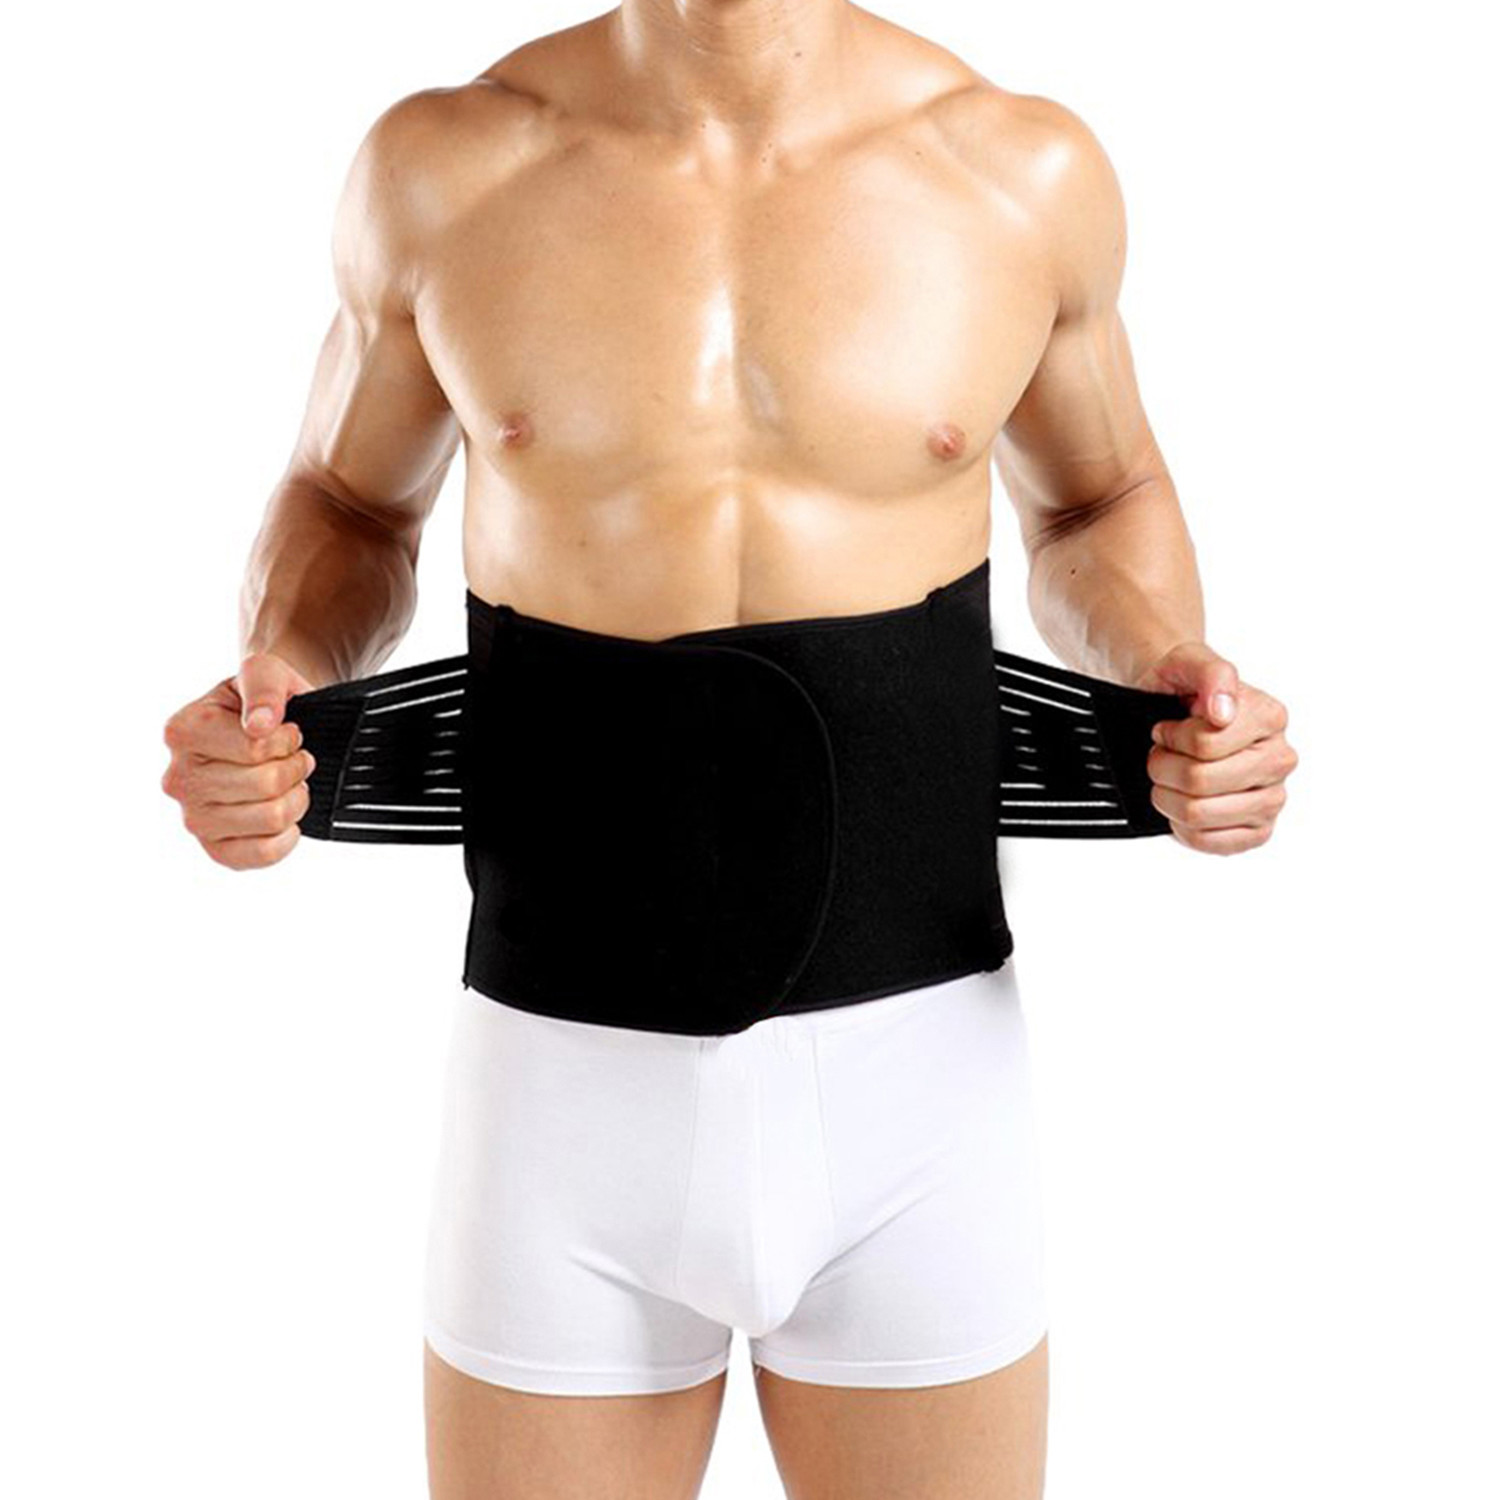 Double-Compression Waist Slimming Belt // Black - Extreme Fit - Touch ...